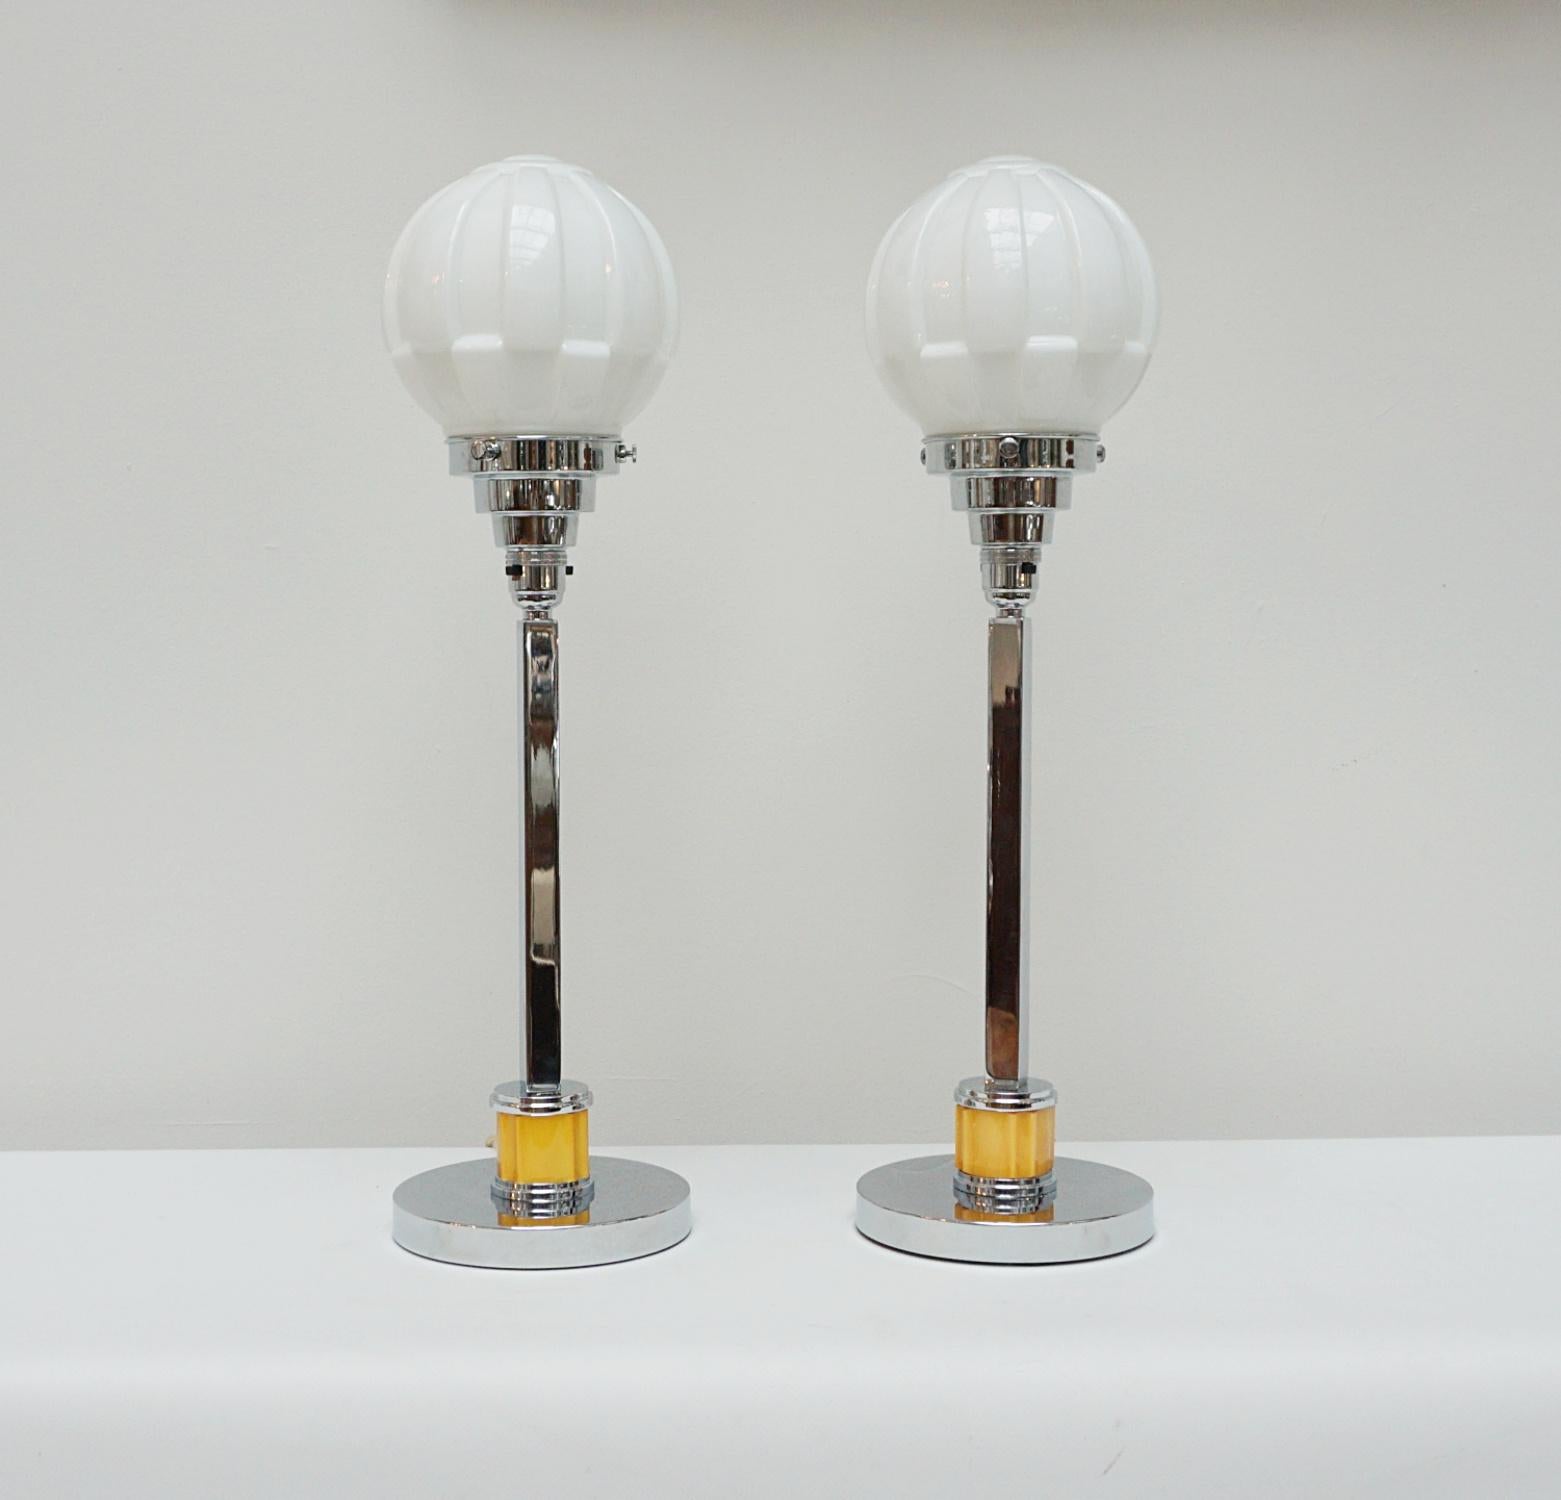 A pair of tall Art Deco table lamps. Chromed metal squared stems with a section of yellow bakelite. Set over stepped circular base. White glass globe shades. 

Dimensions: H 55cm W 16cm 

Origin: English

Item Number: J289

All of our lighting is